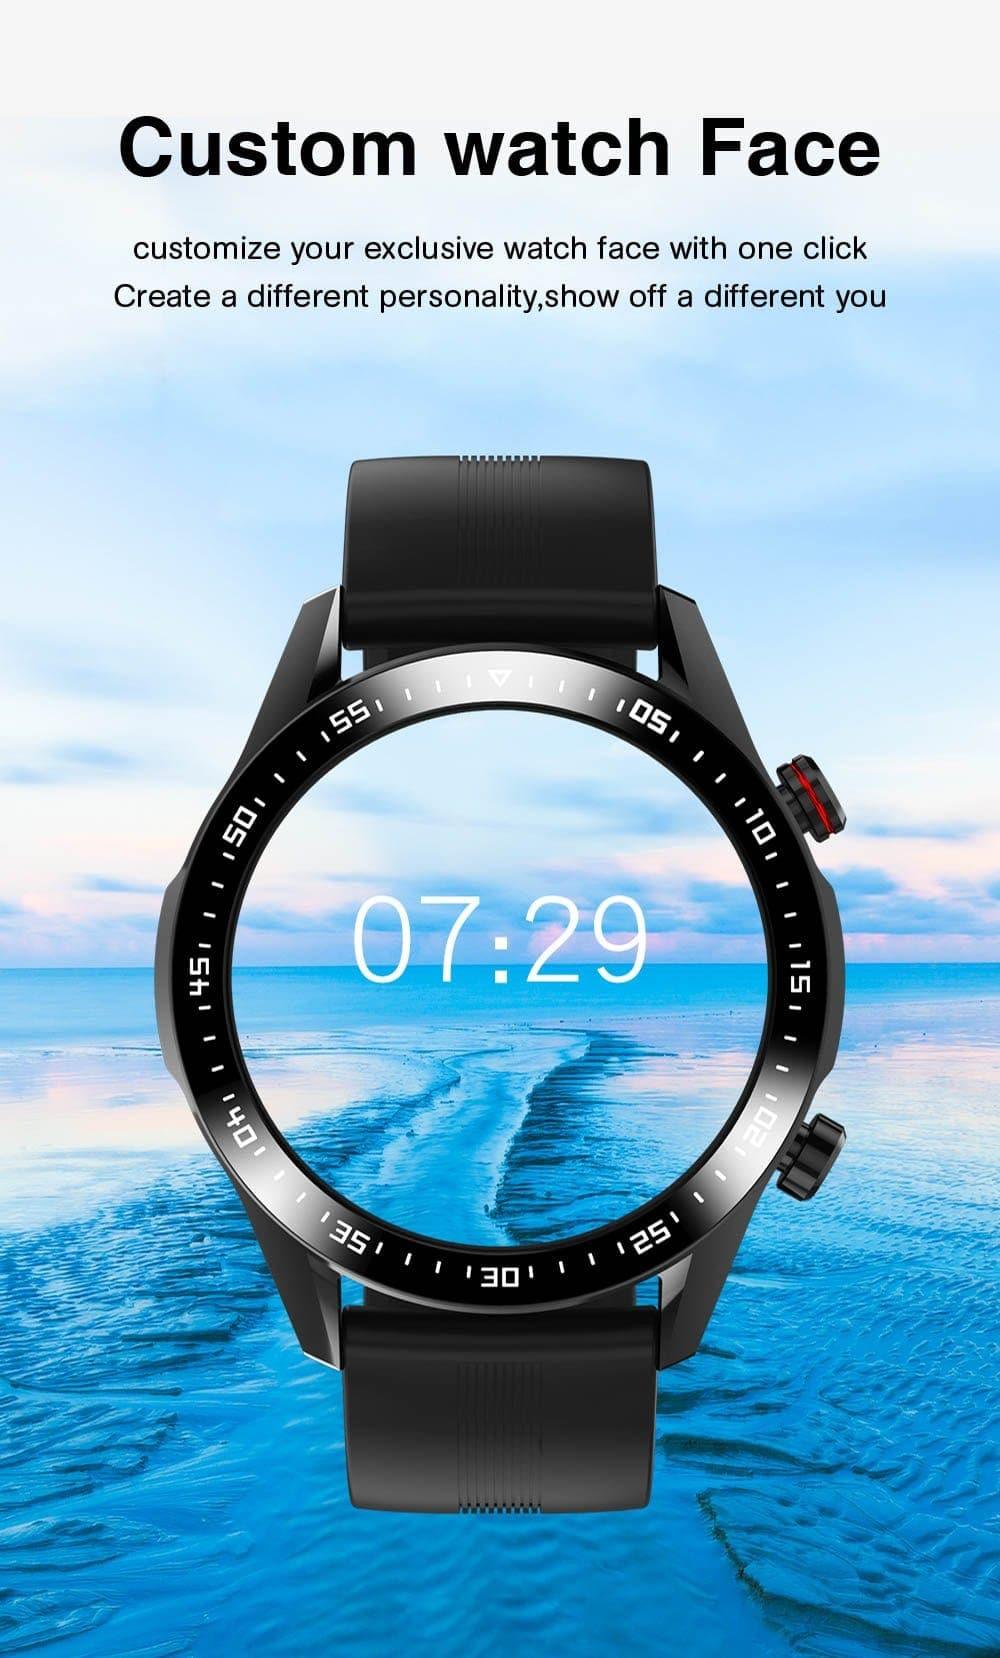 Smart Watch Women Men with Bluetooth Call For Android, IOS - Ammpoure Wellbeing